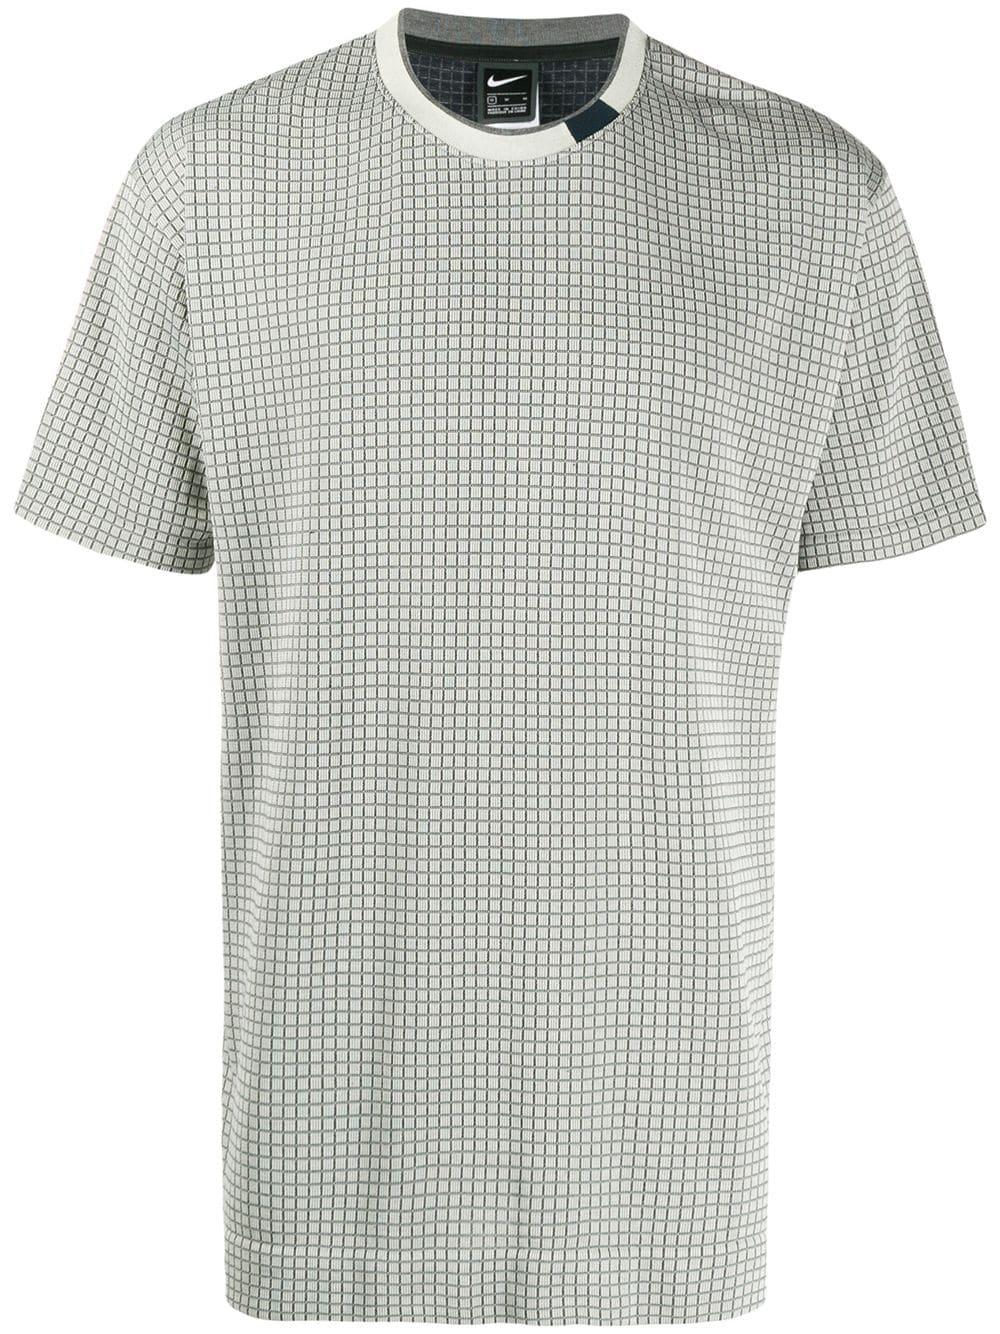 Nike Cotton Tech Pack T-shirt in Gray for Men - Lyst